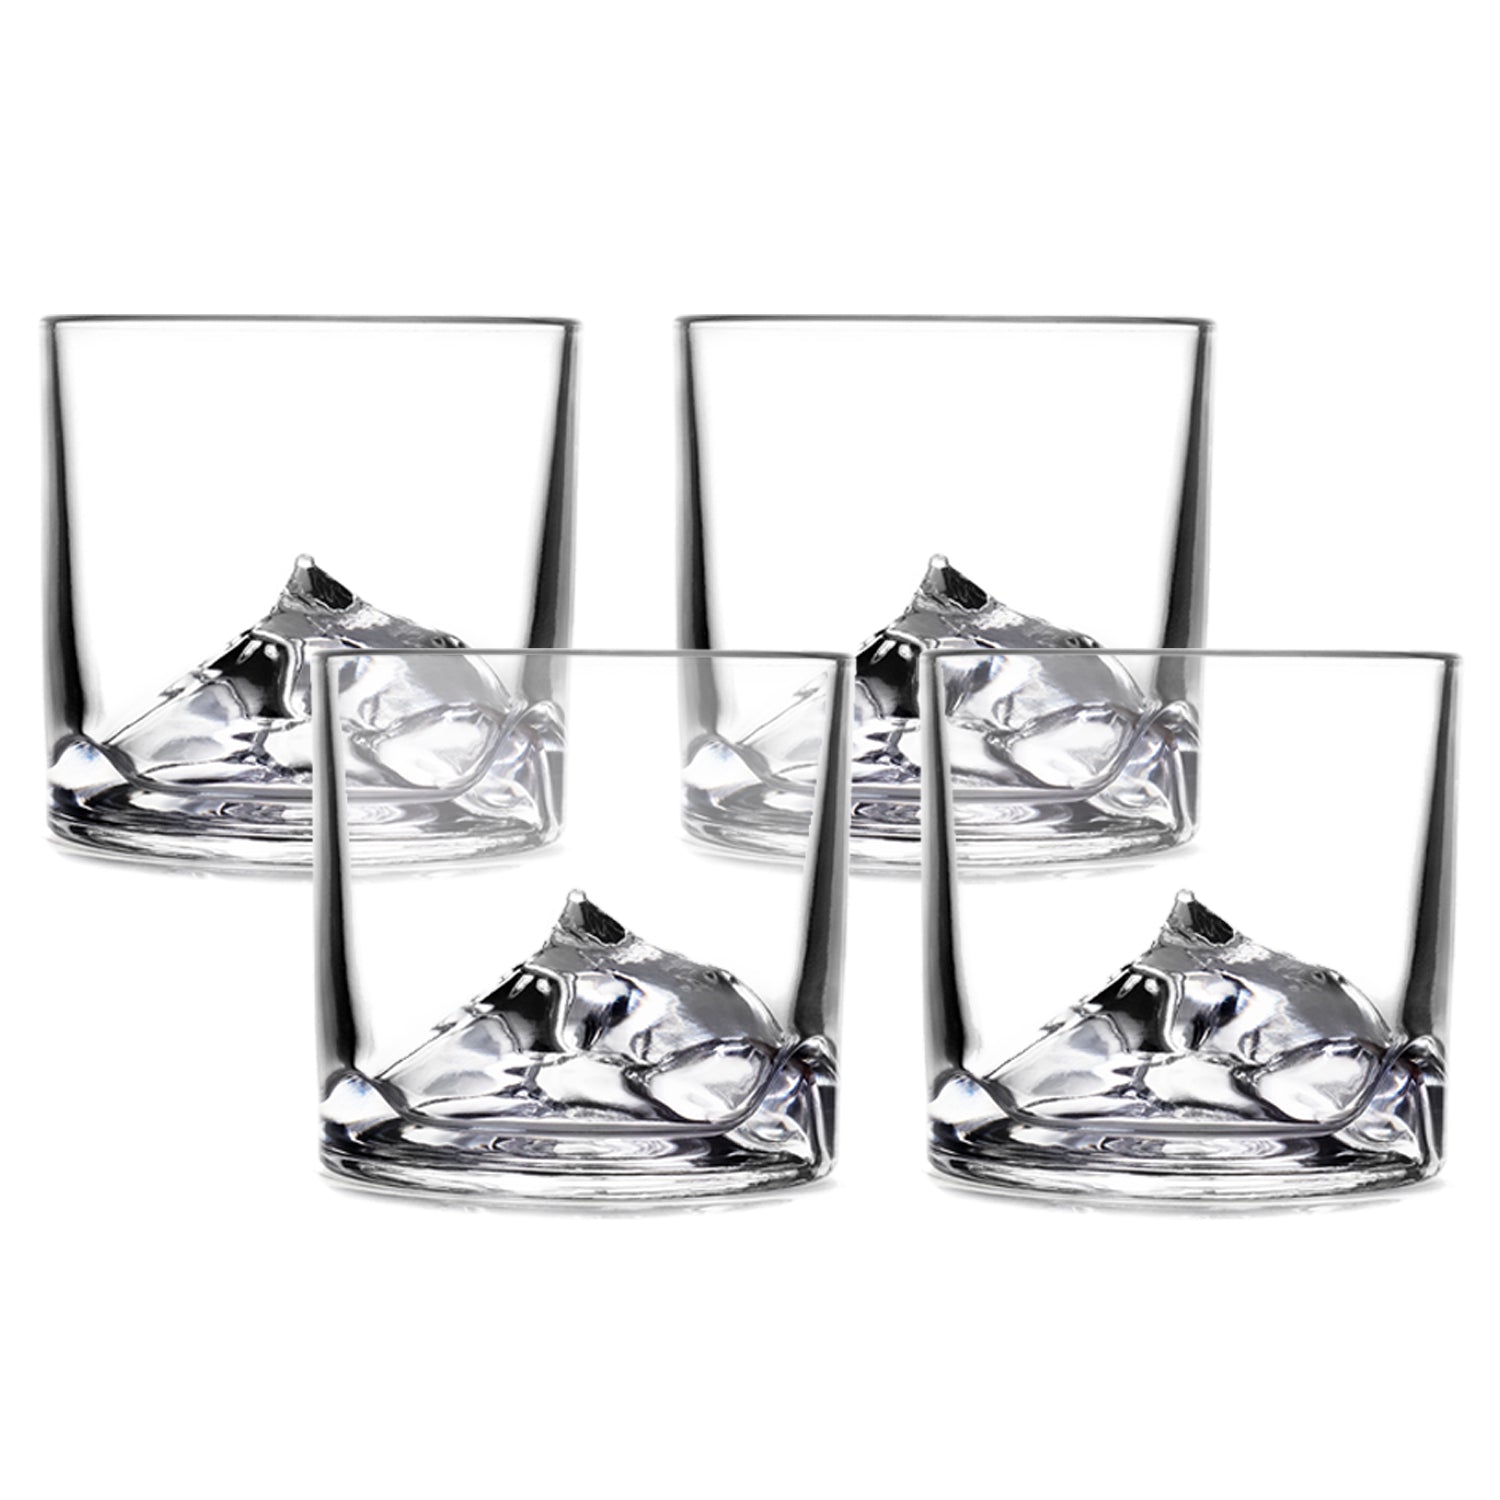 Online store Whiskey Tumblers: Crafted to Perfection, glass sets